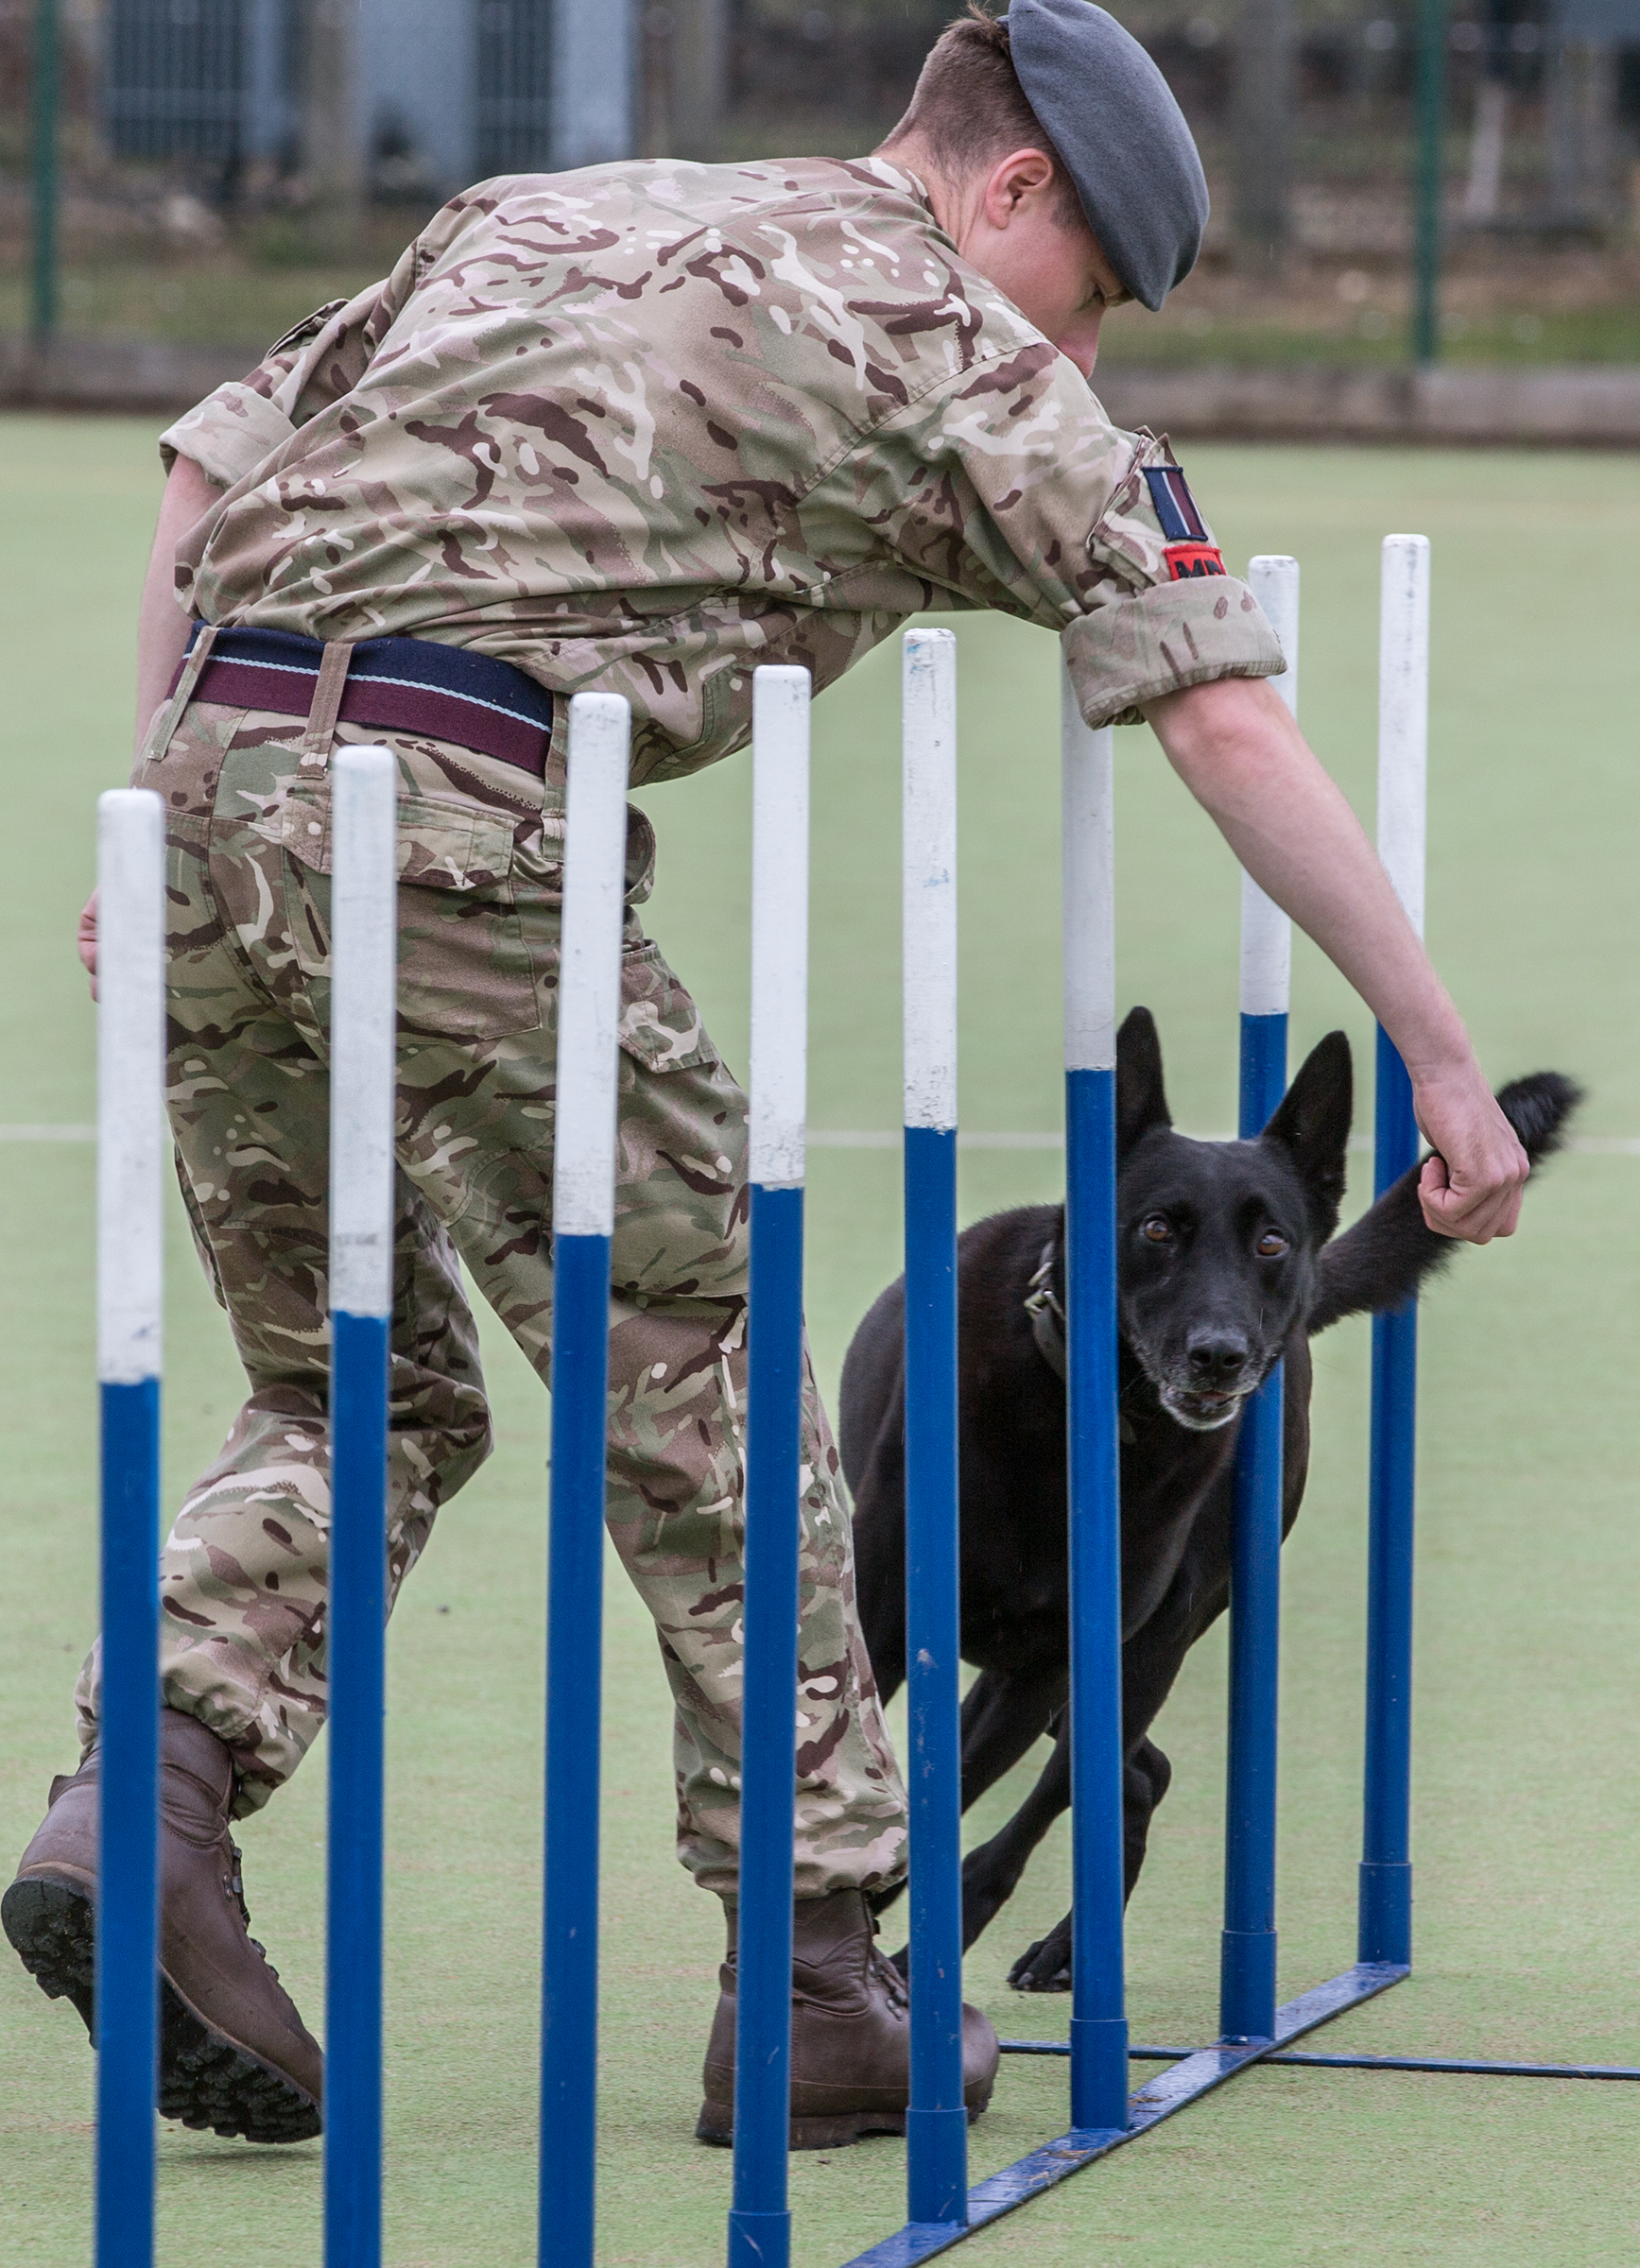 Image shows RAF dog handler guiding his Military Working Dog around poles on an agility course.